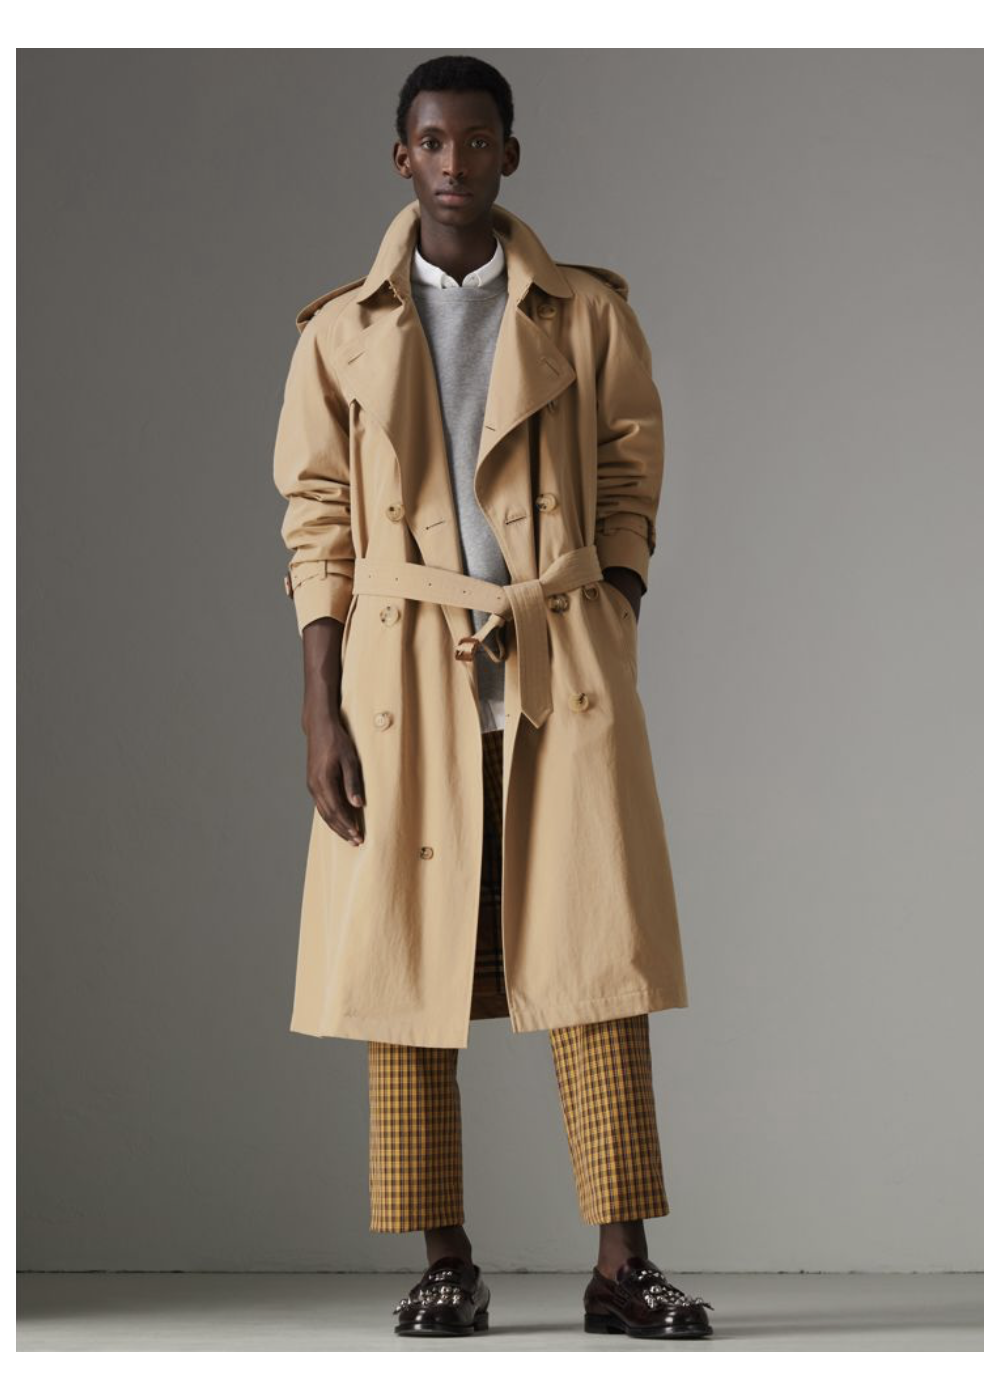 Westminster Heritage Trench Coat